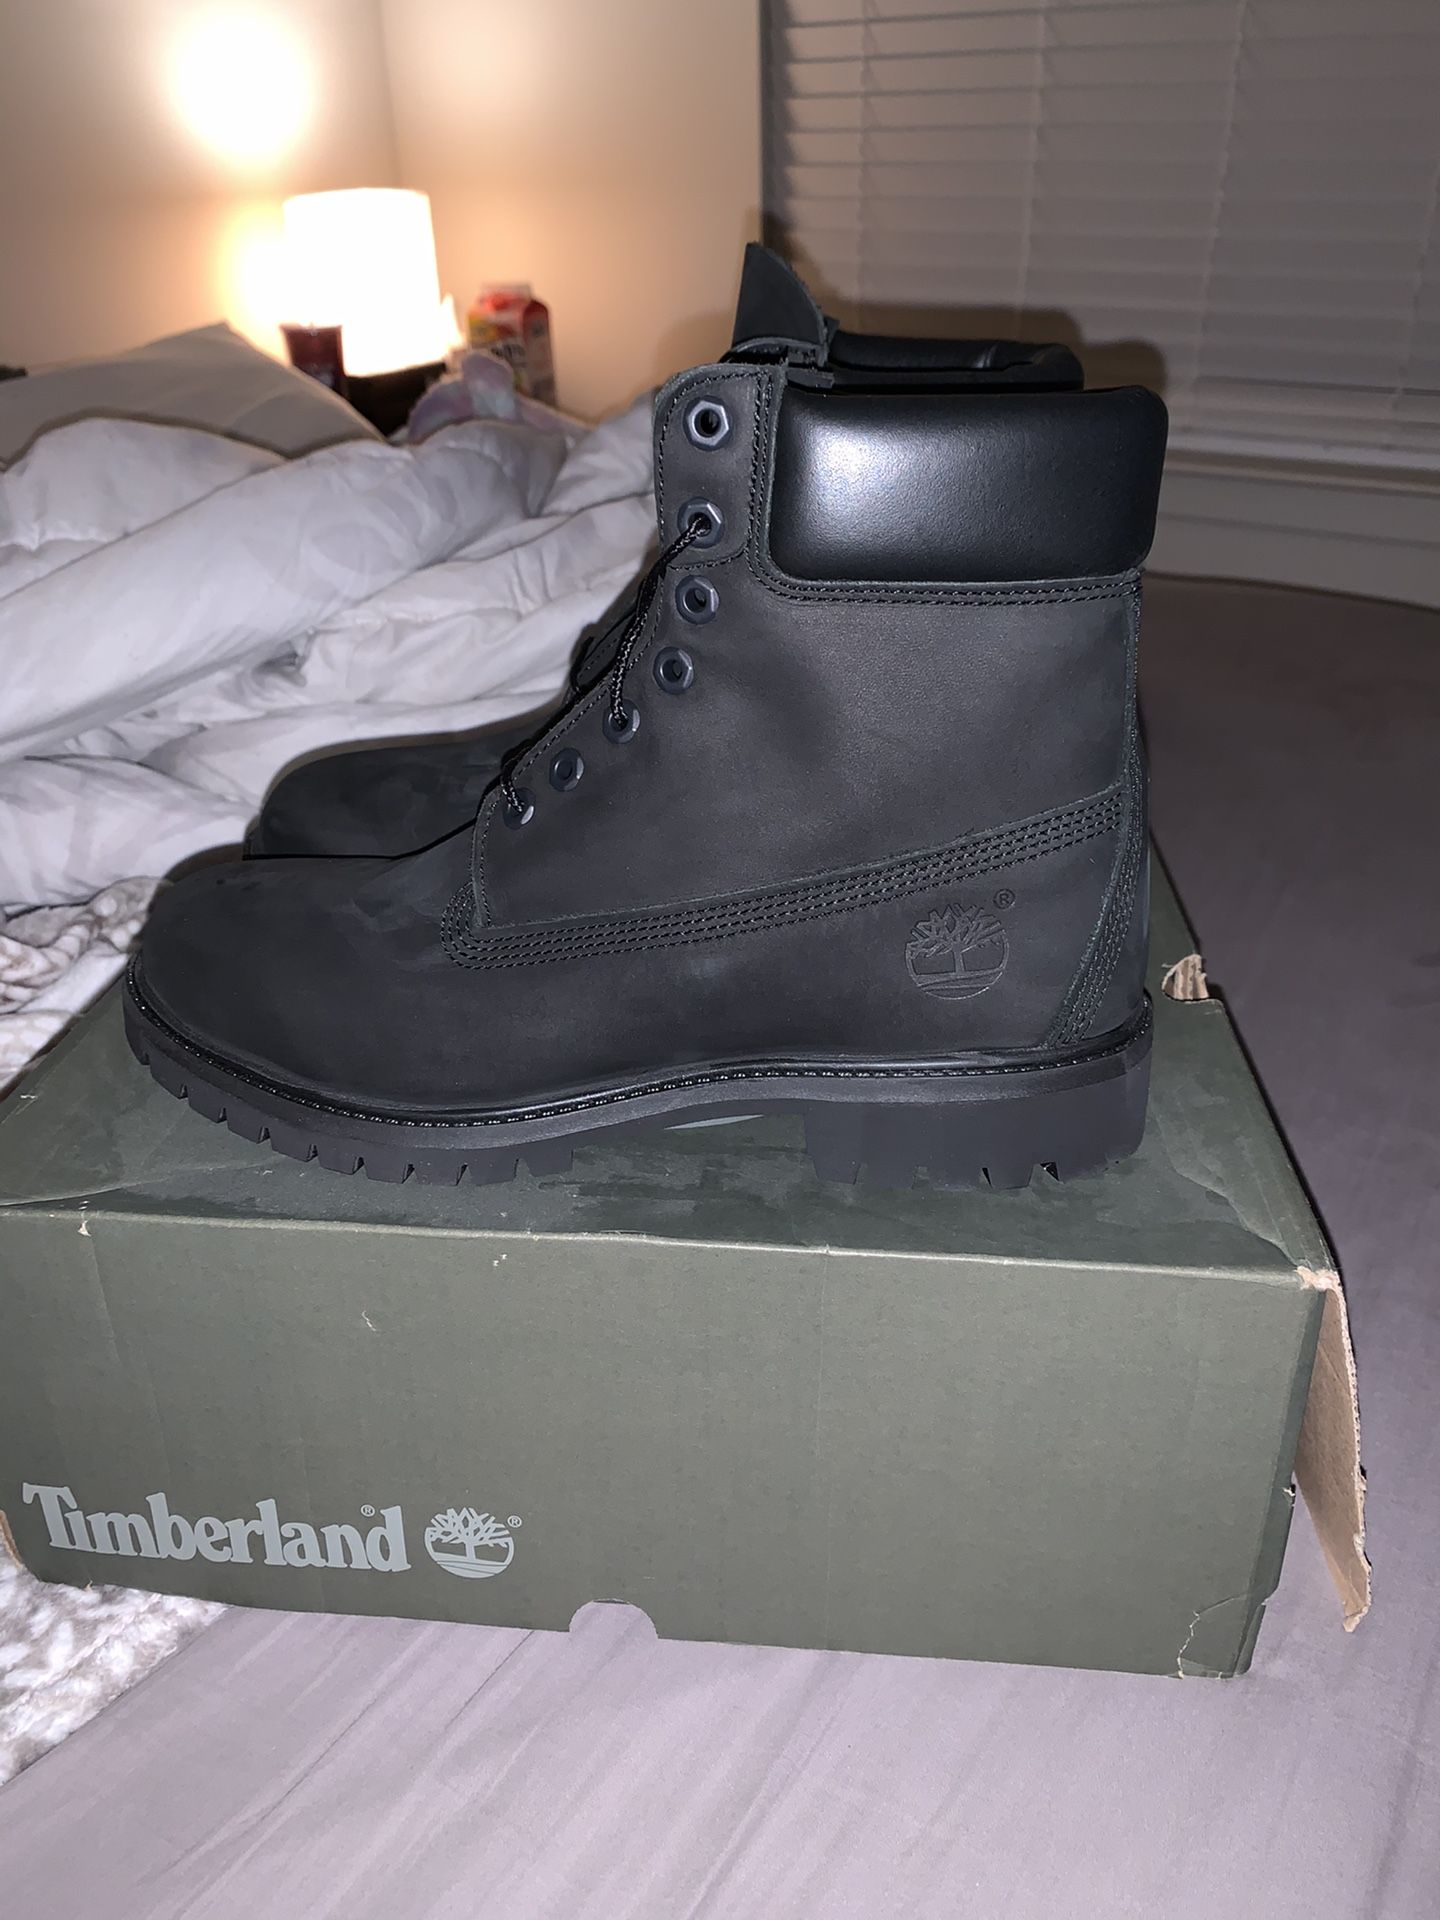 Men’s Black Timberland Boots size 9.5